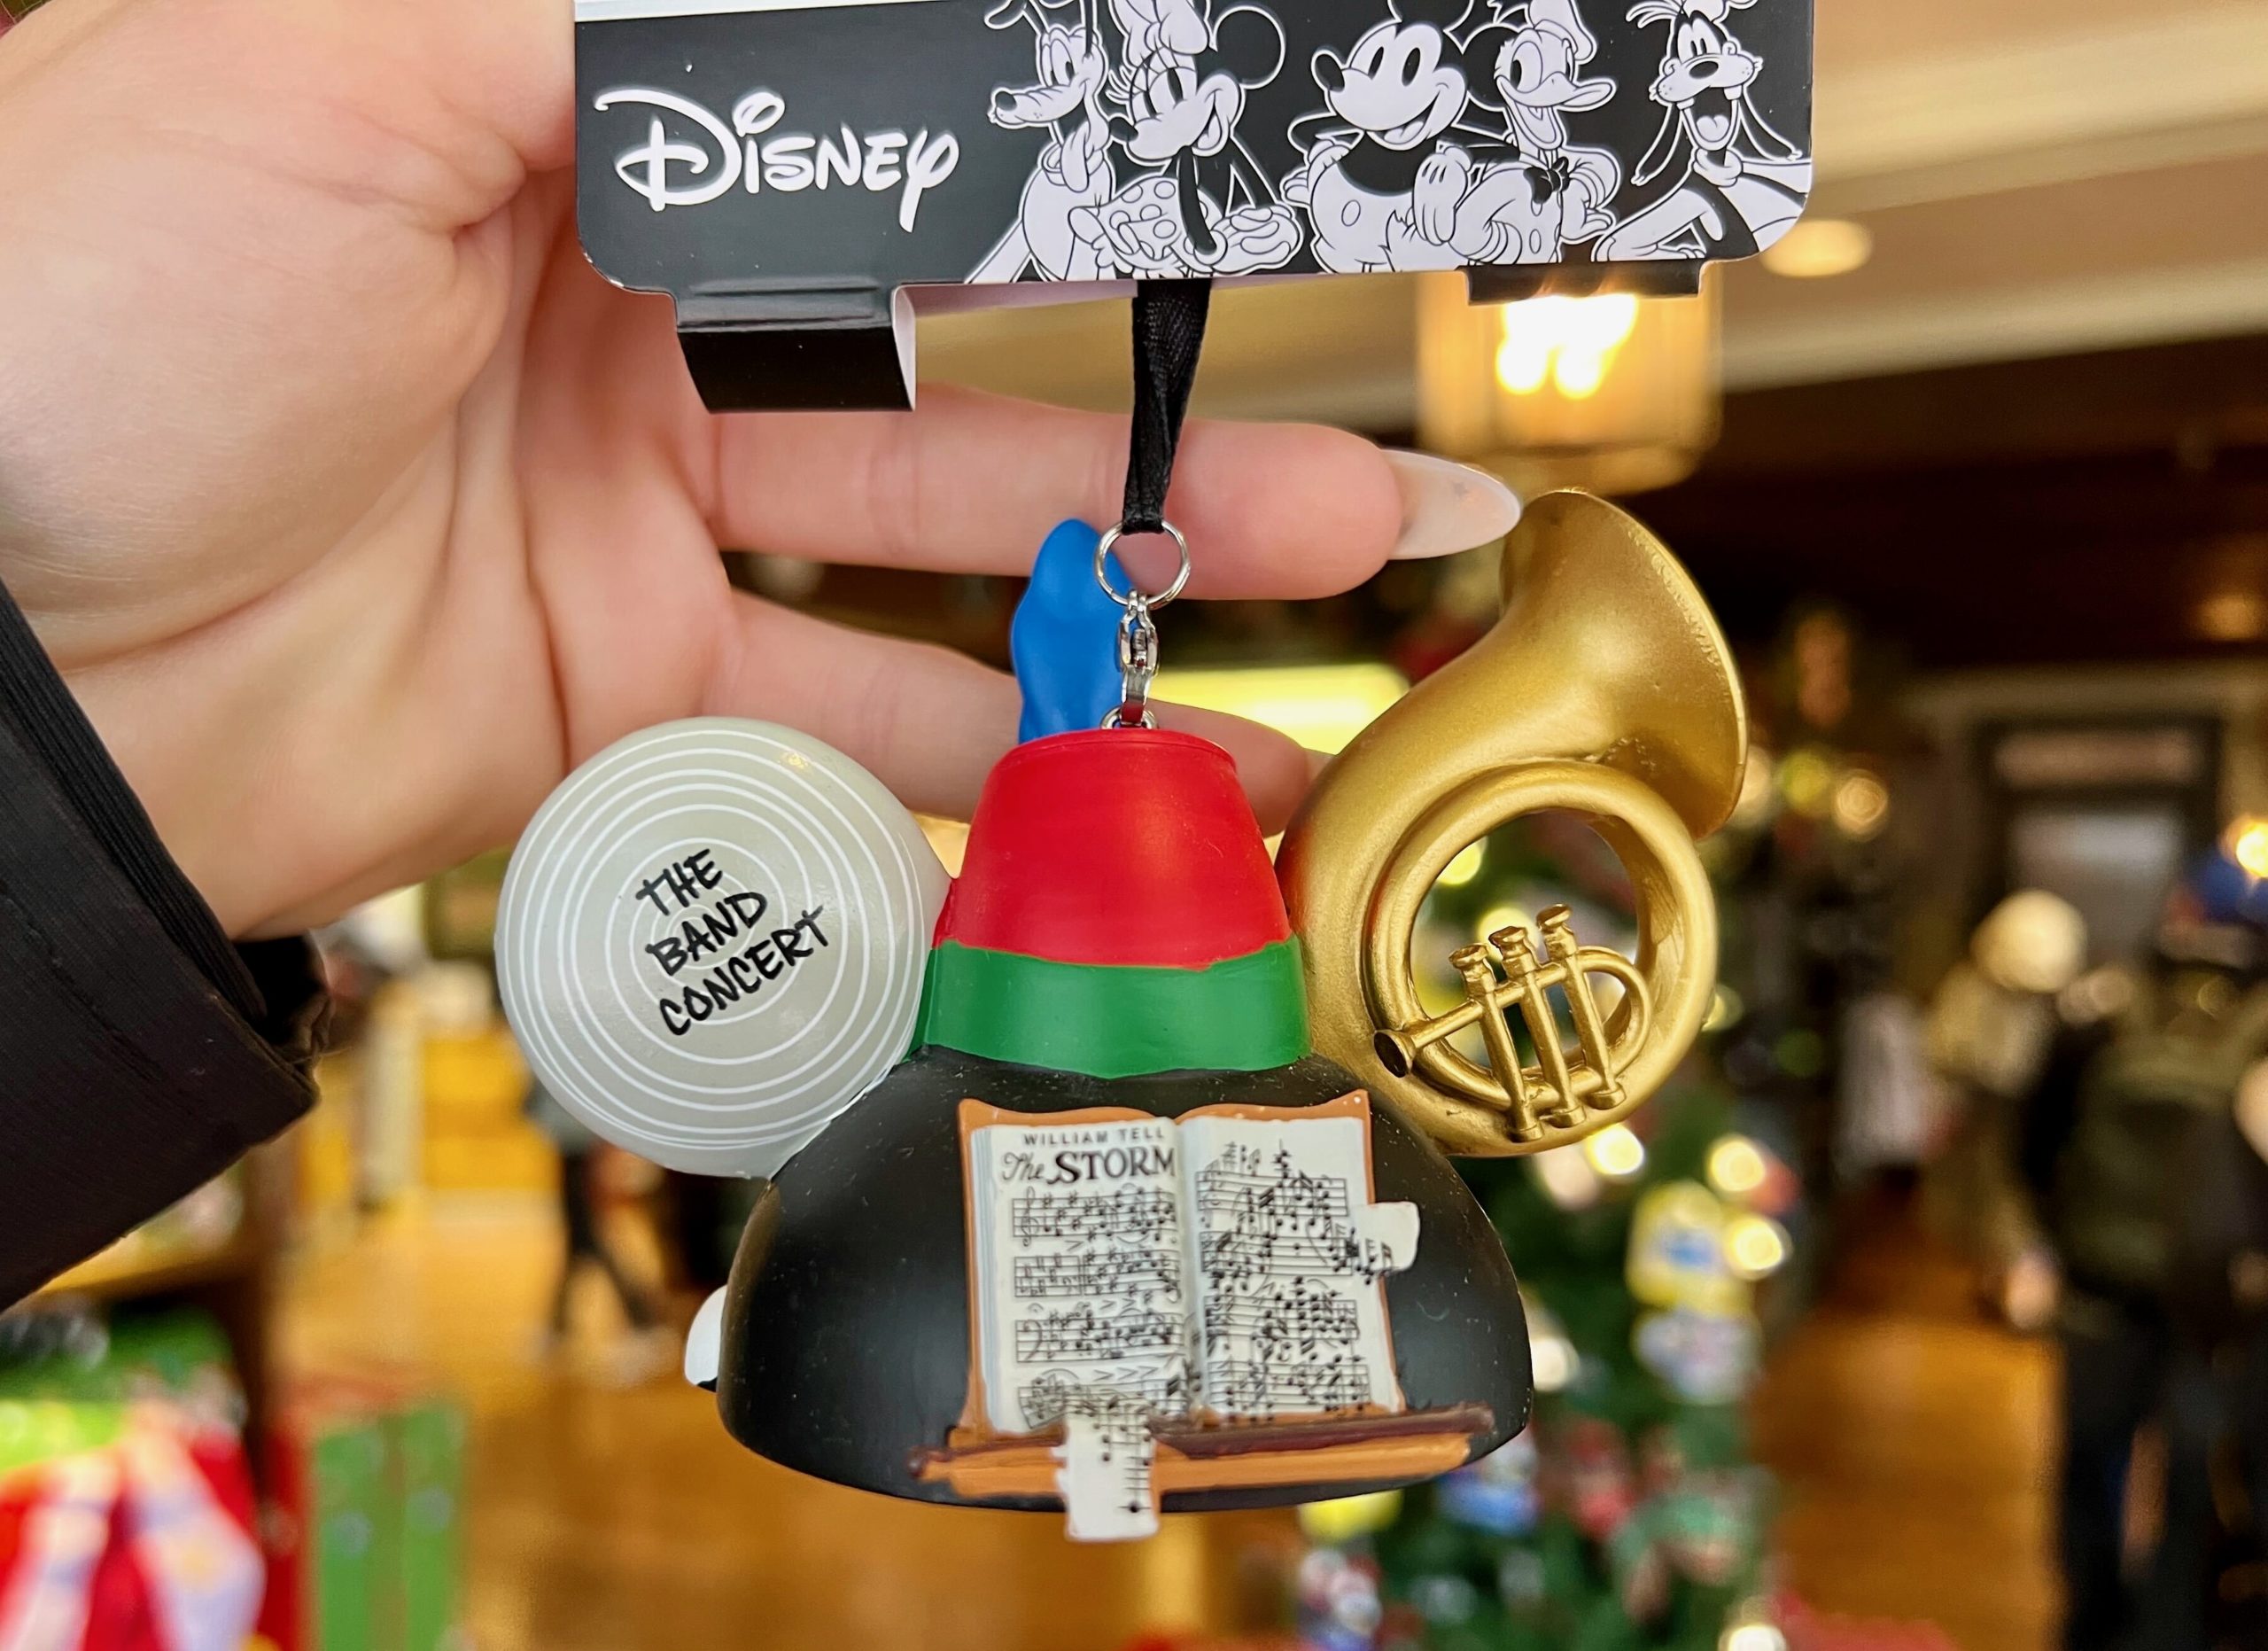 Mickey Band Sketchbook ornament